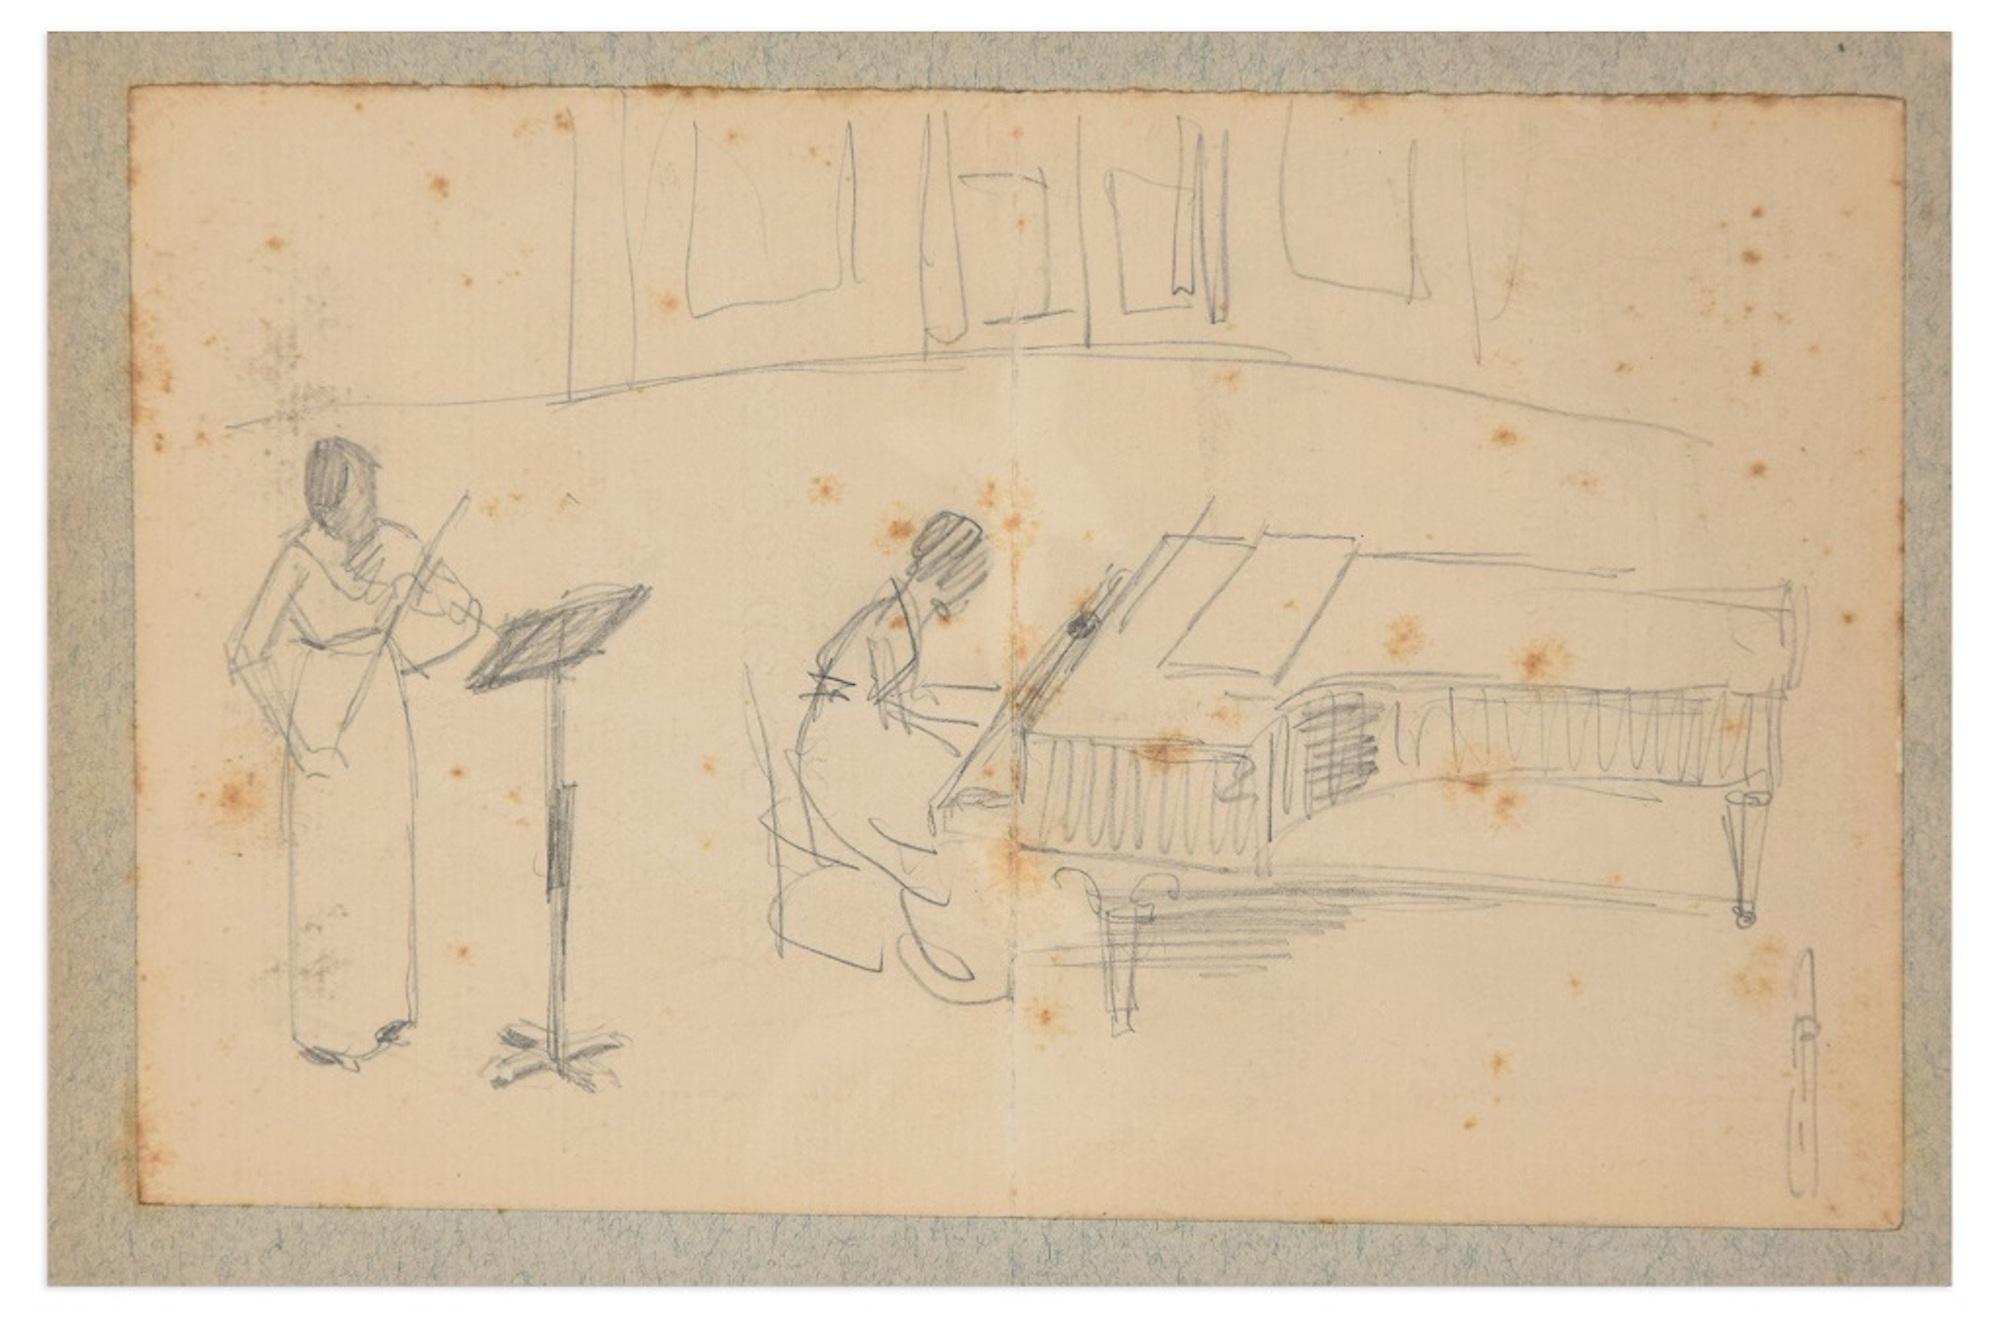 Concertino - Original Pencil Drawing by A.J.B. Roubille - Early 20th Century